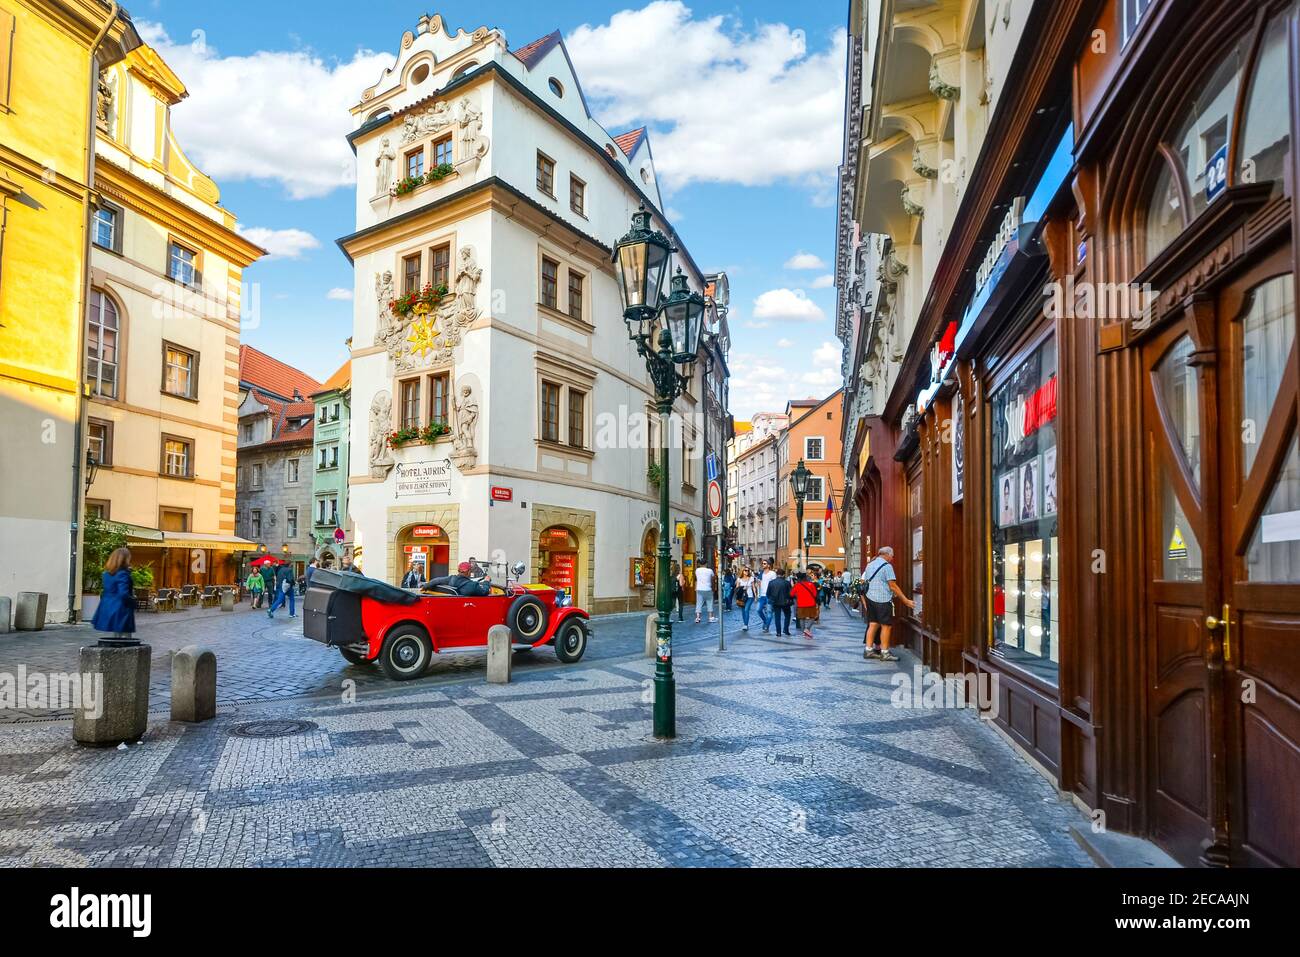 Scenic view of a touristic section of Old Town Prague, Czechia, with vintage automobile, cobbled streets and quaint shops and hotels Stock Photo